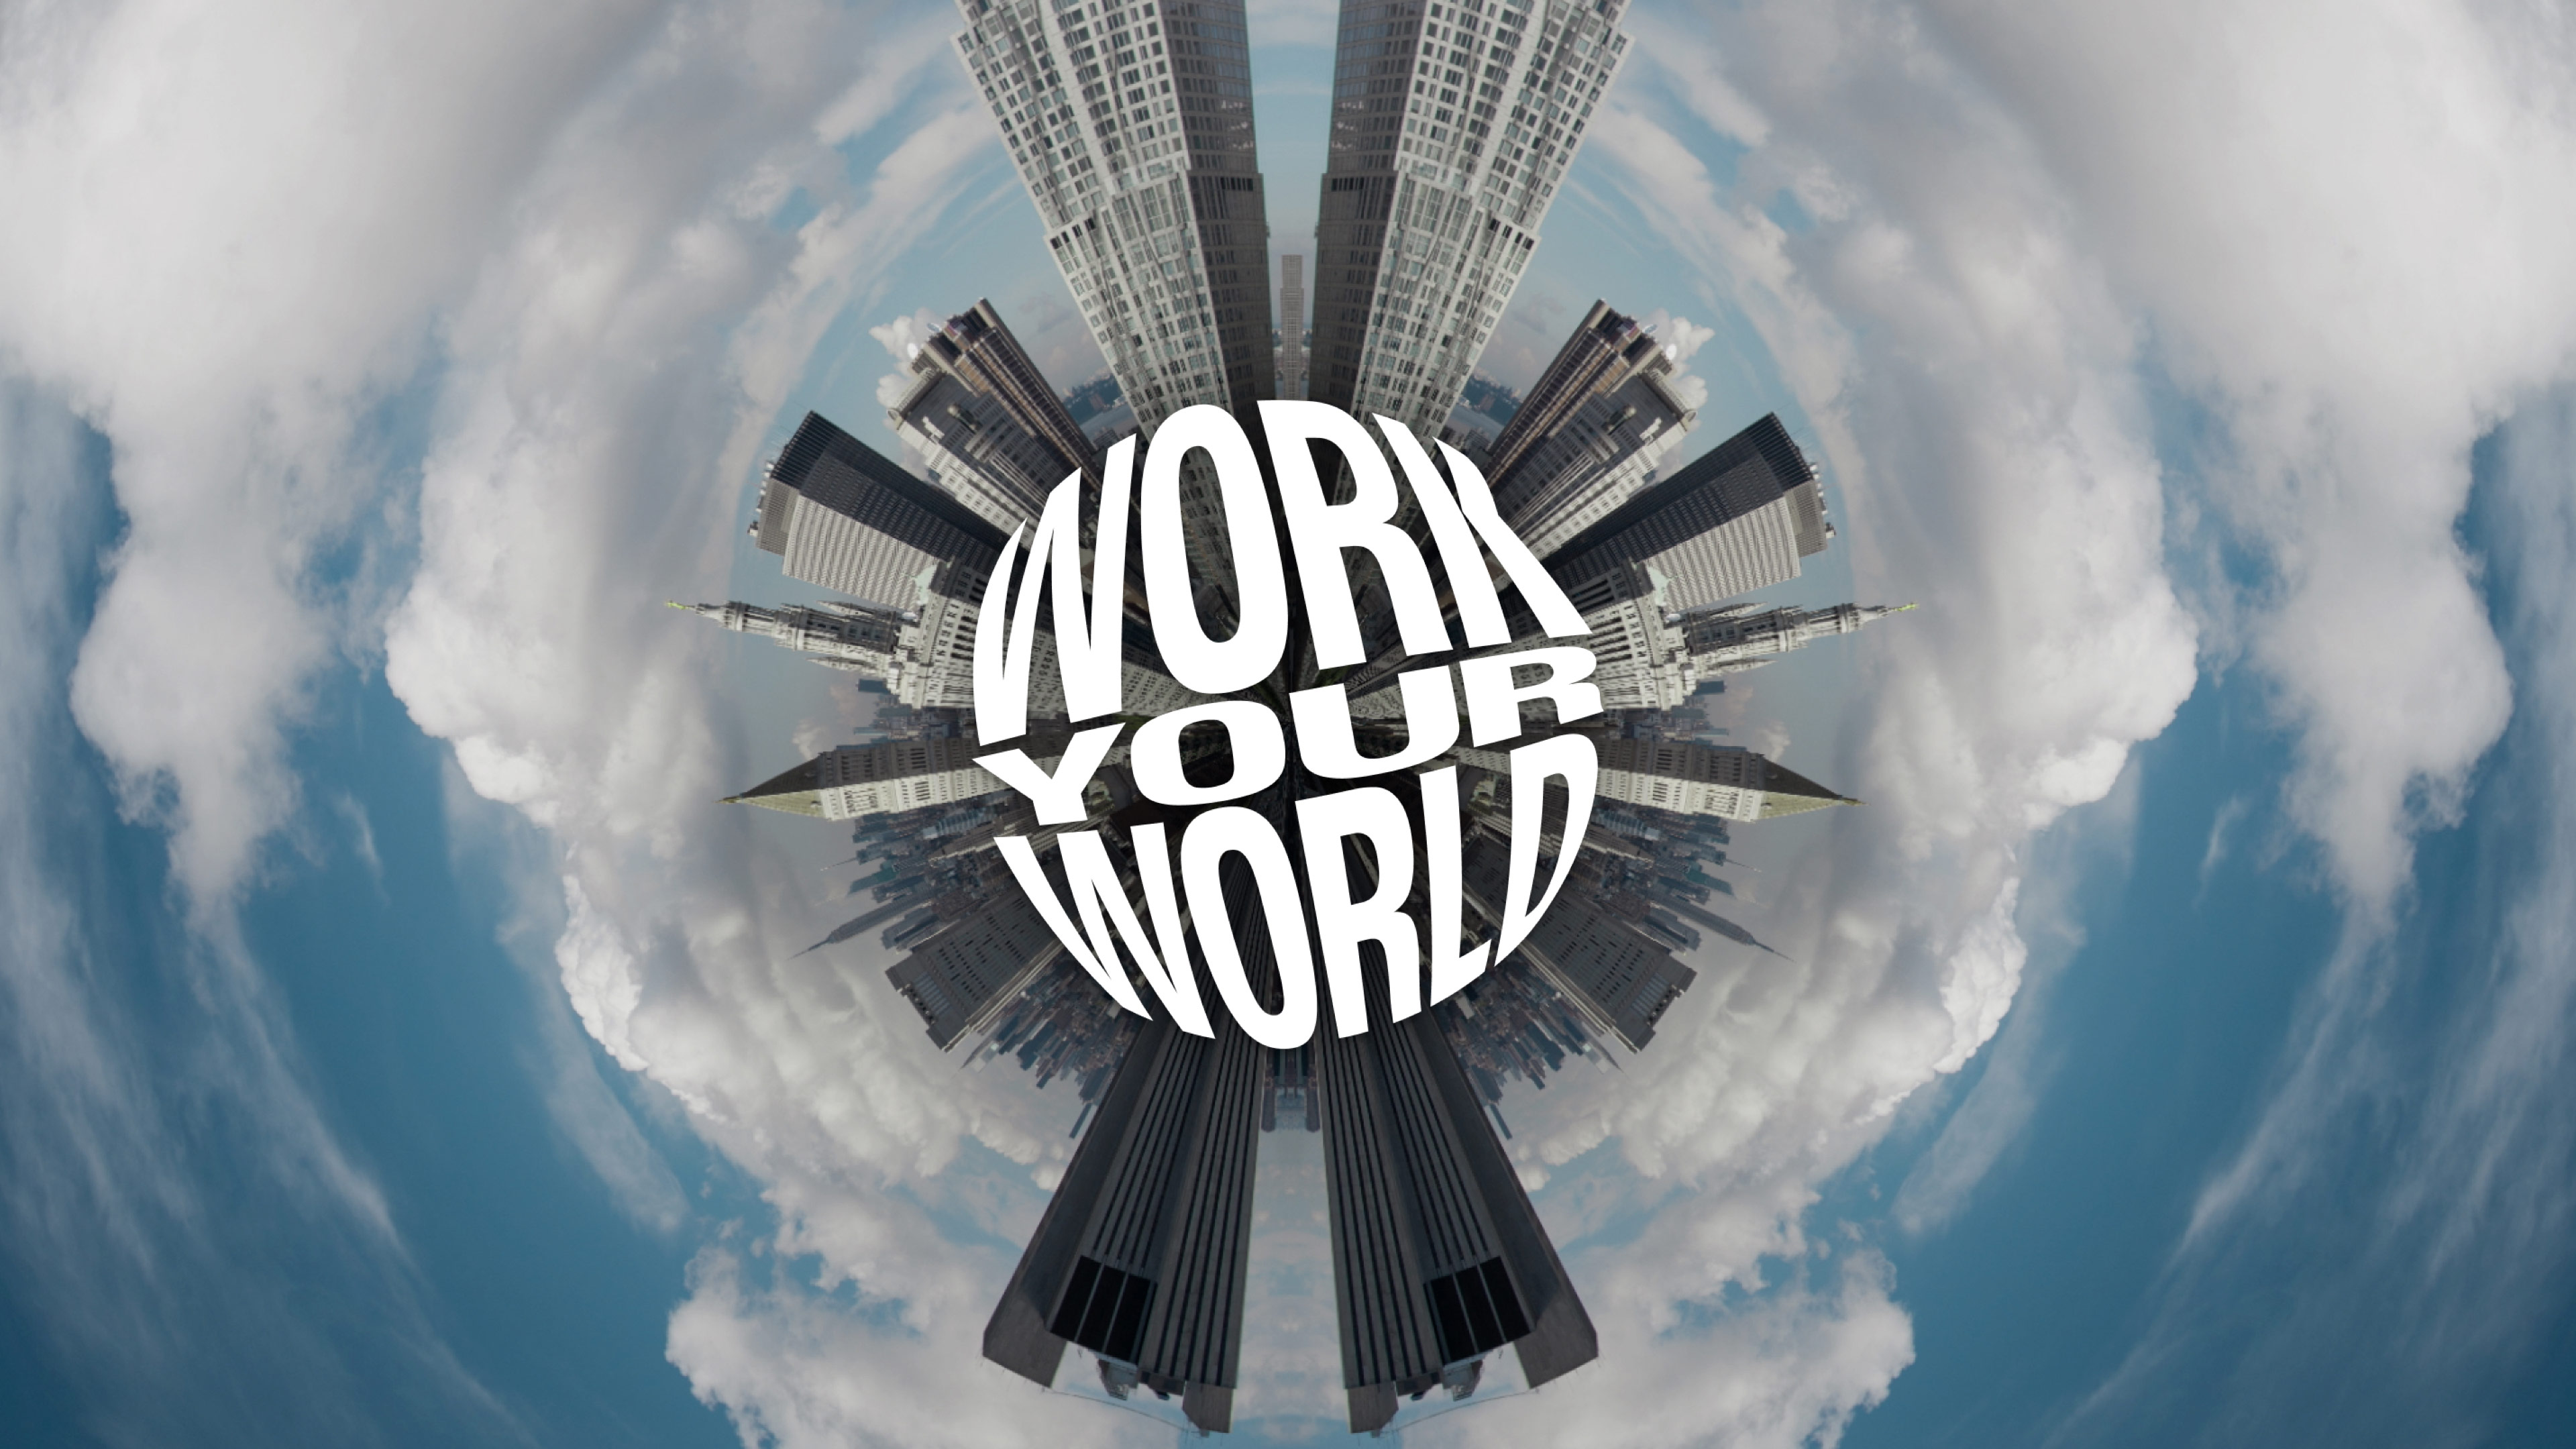 publicis-launches--work-your-world--on-marcel